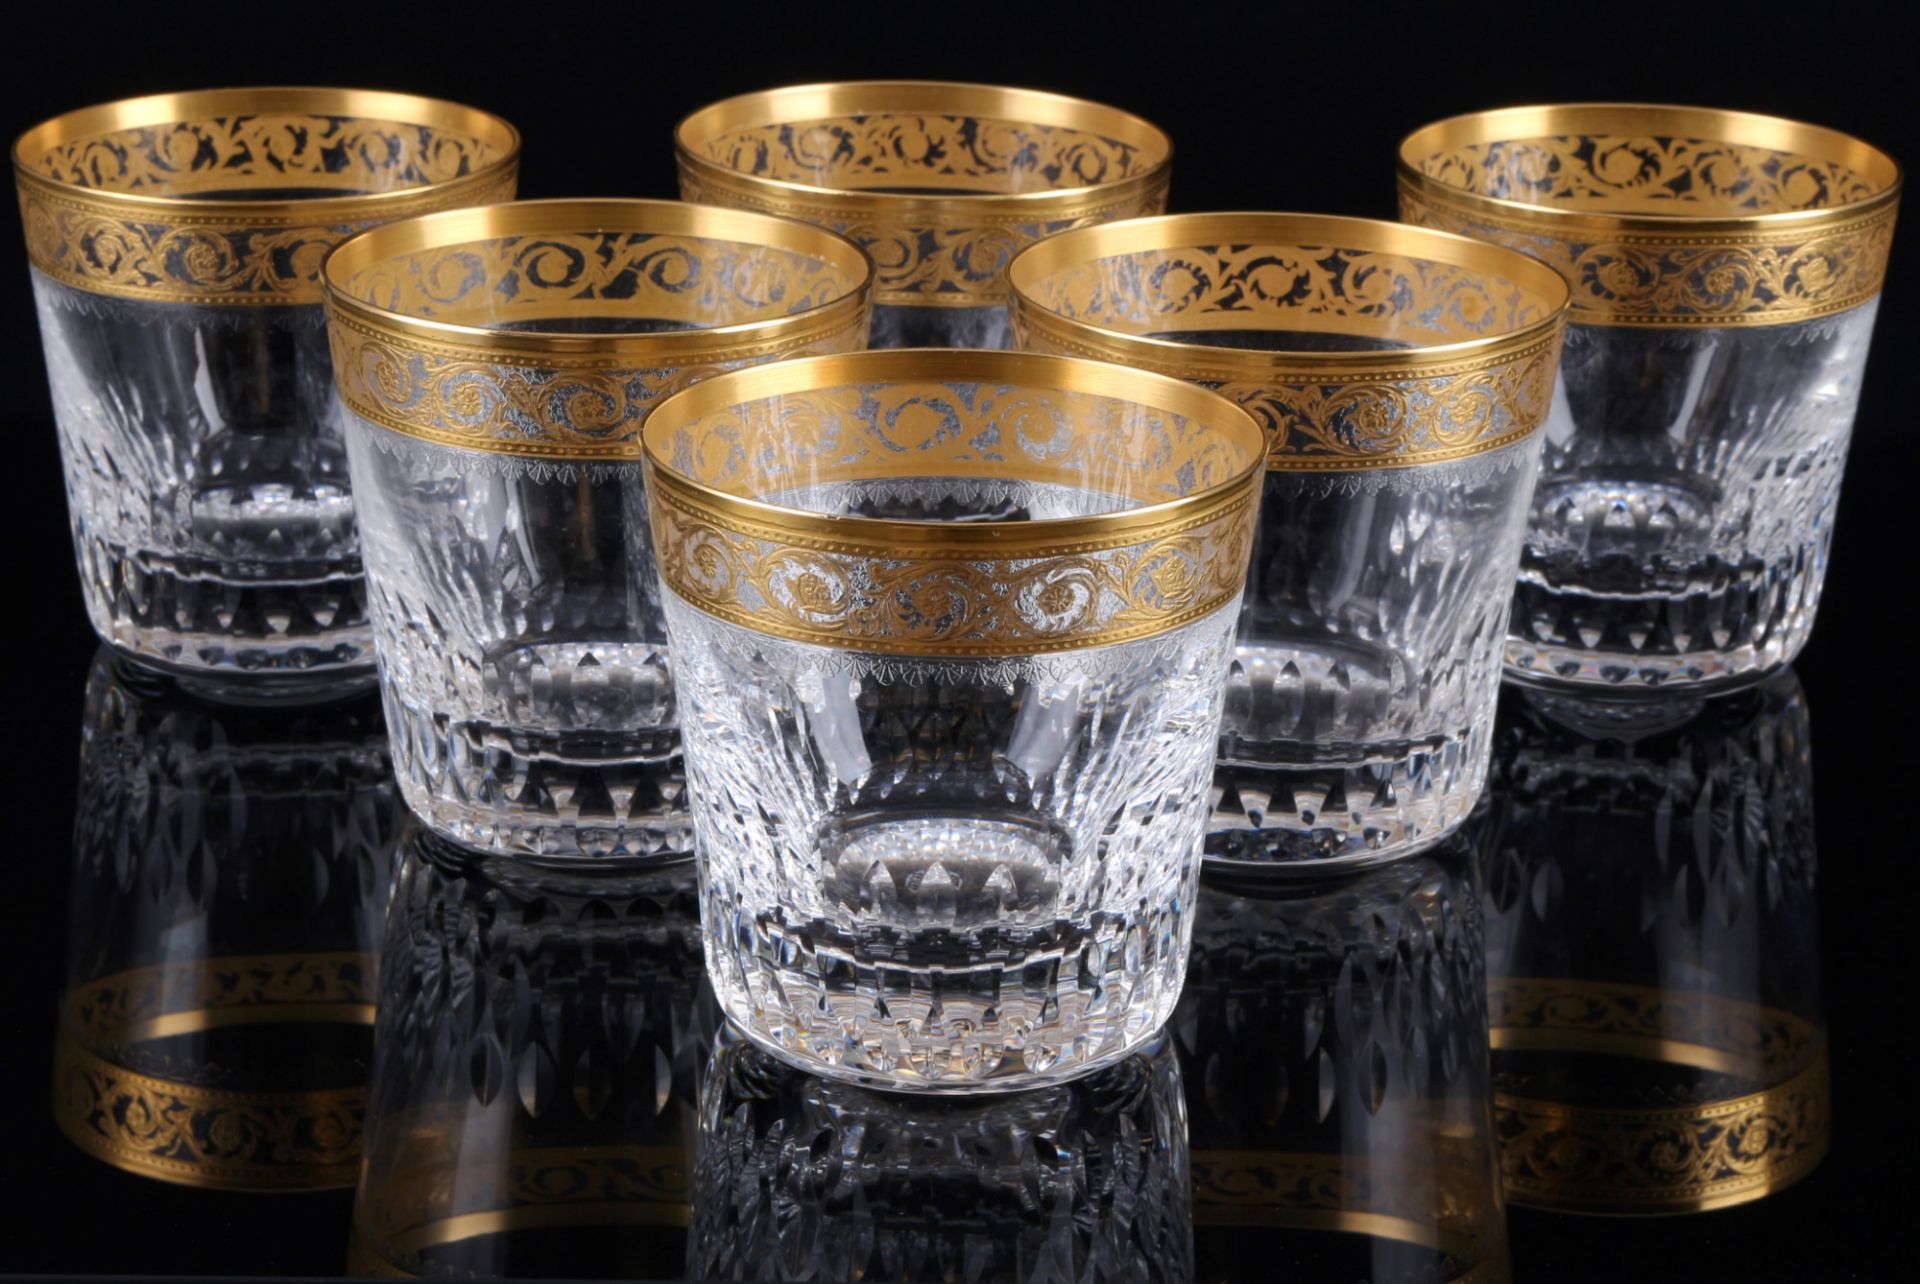 St. Louis Thistle Gold 6 Tumbler Whiskeybecher, old-fashioned whiskey glasses,